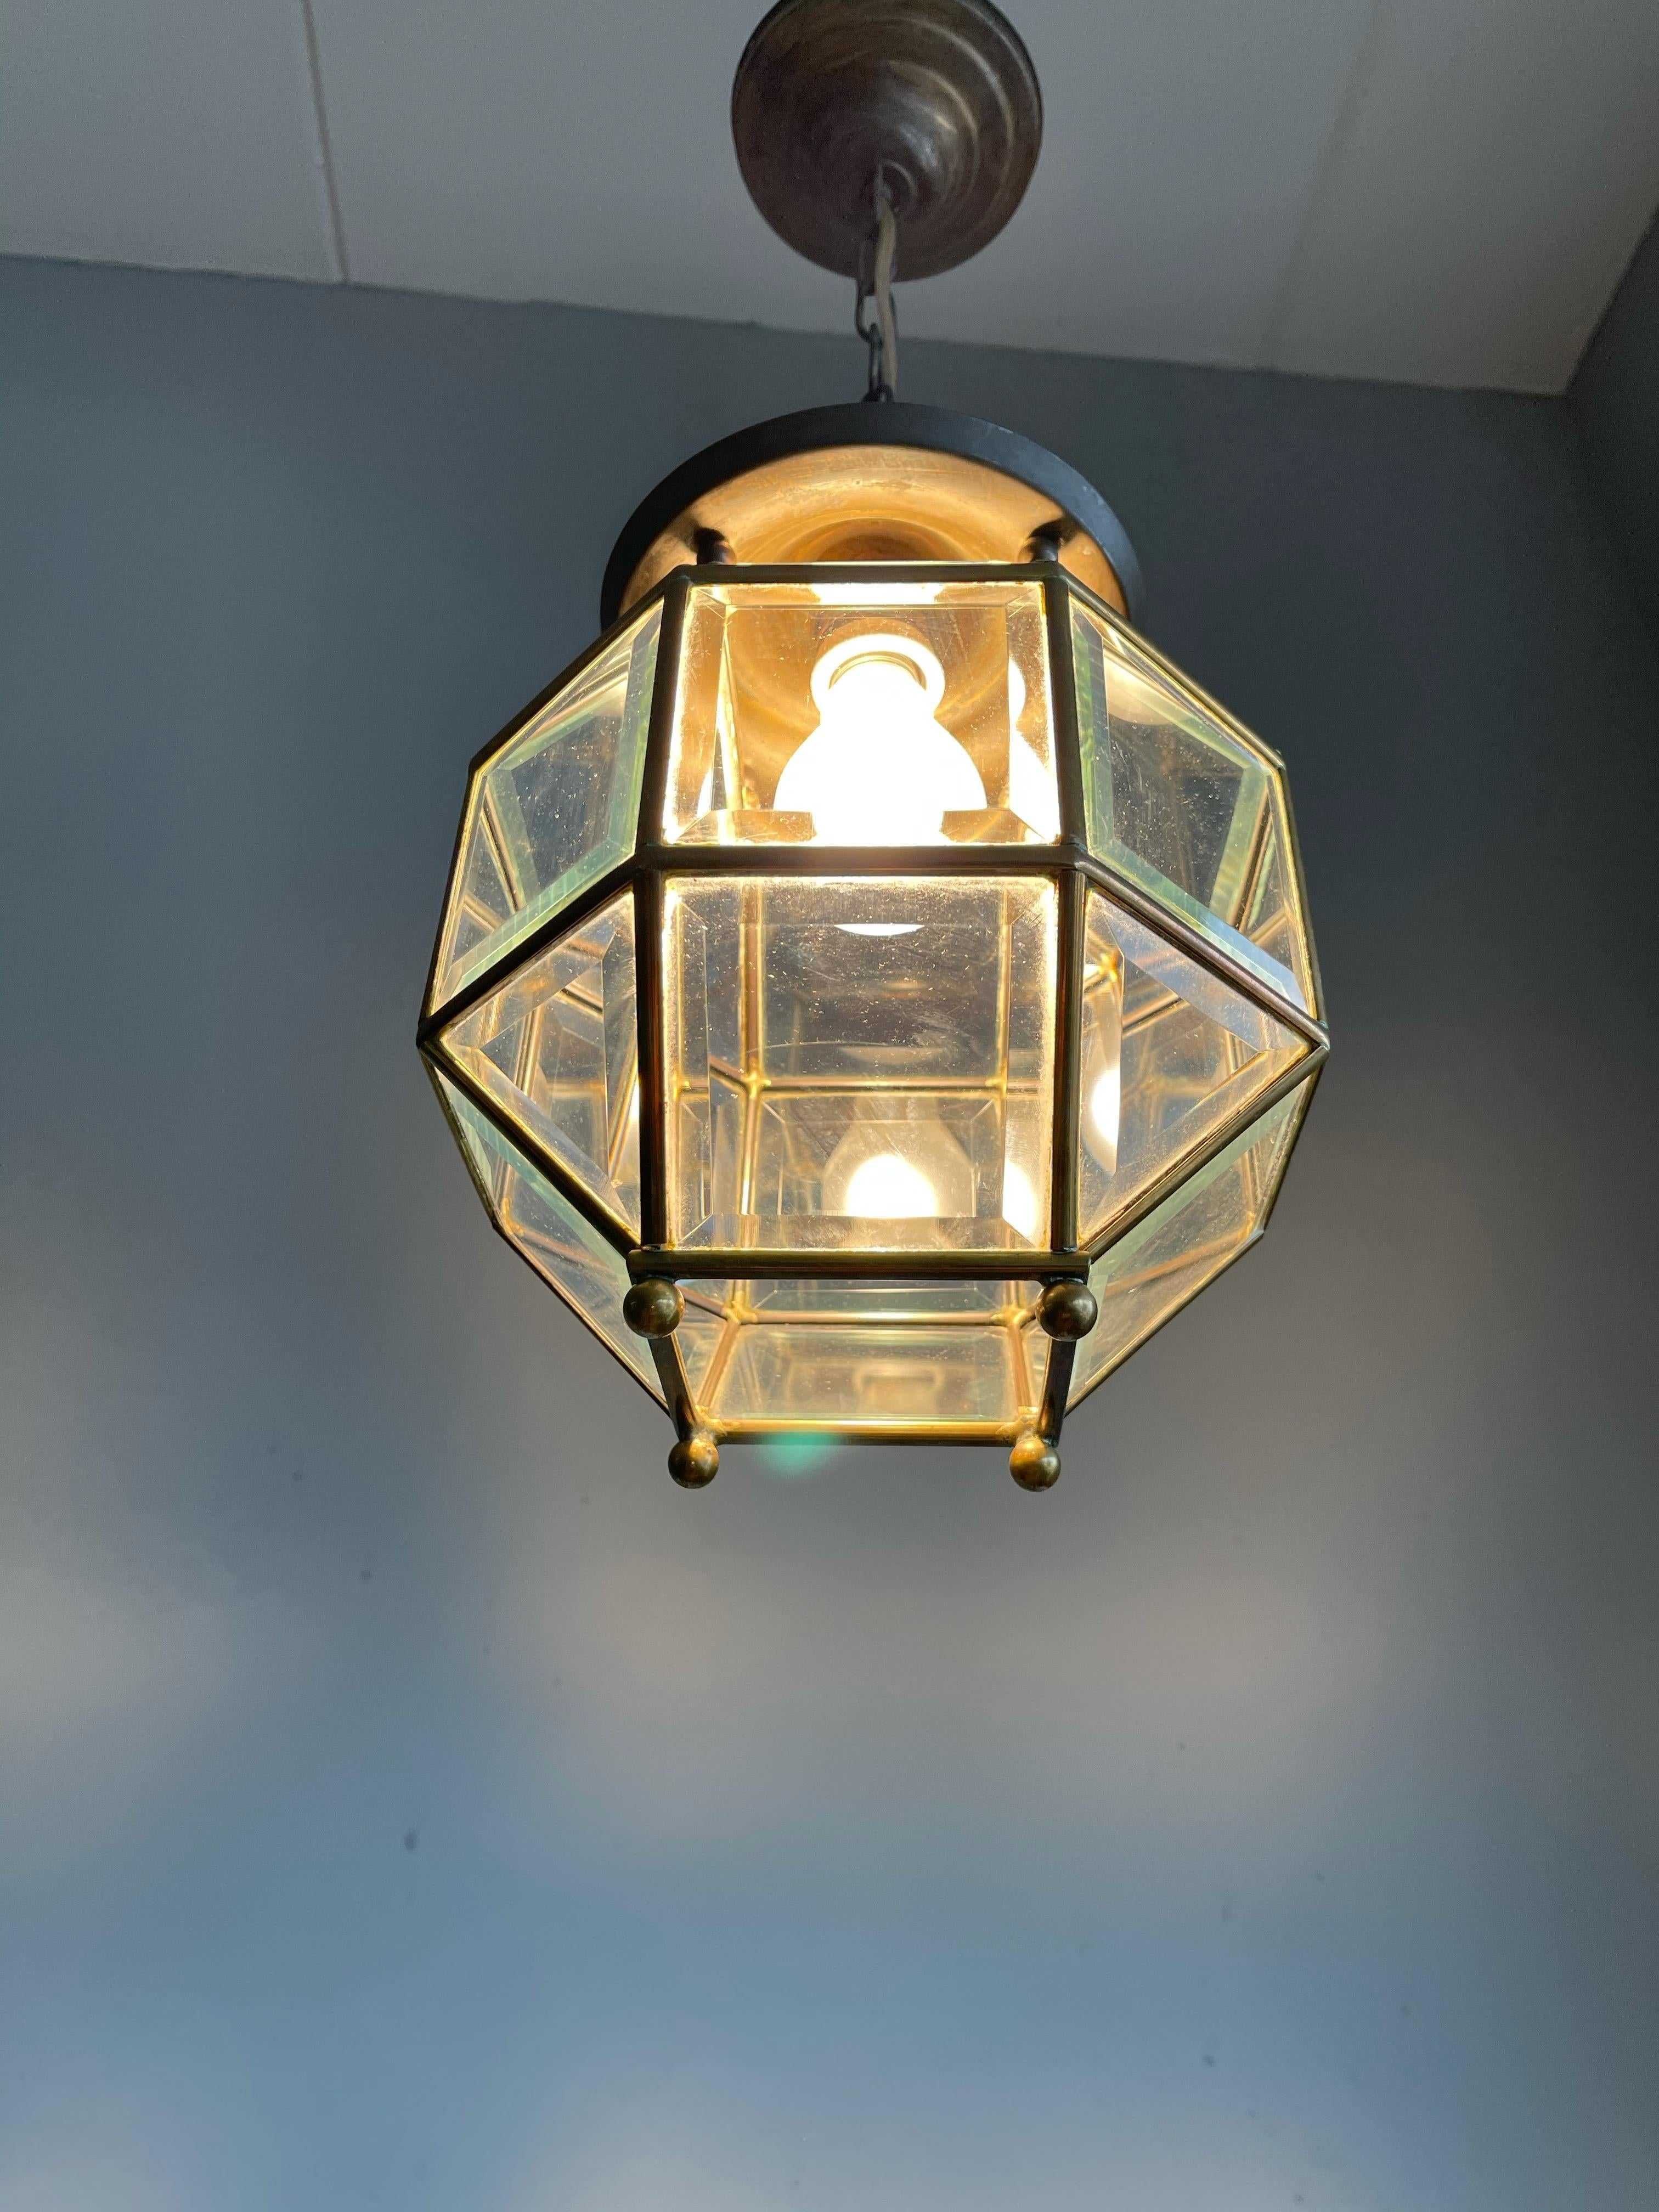 Early 1900s Beveled Glass and Brass Pendant Cubic Adolf Loos Style Ceiling Light 12